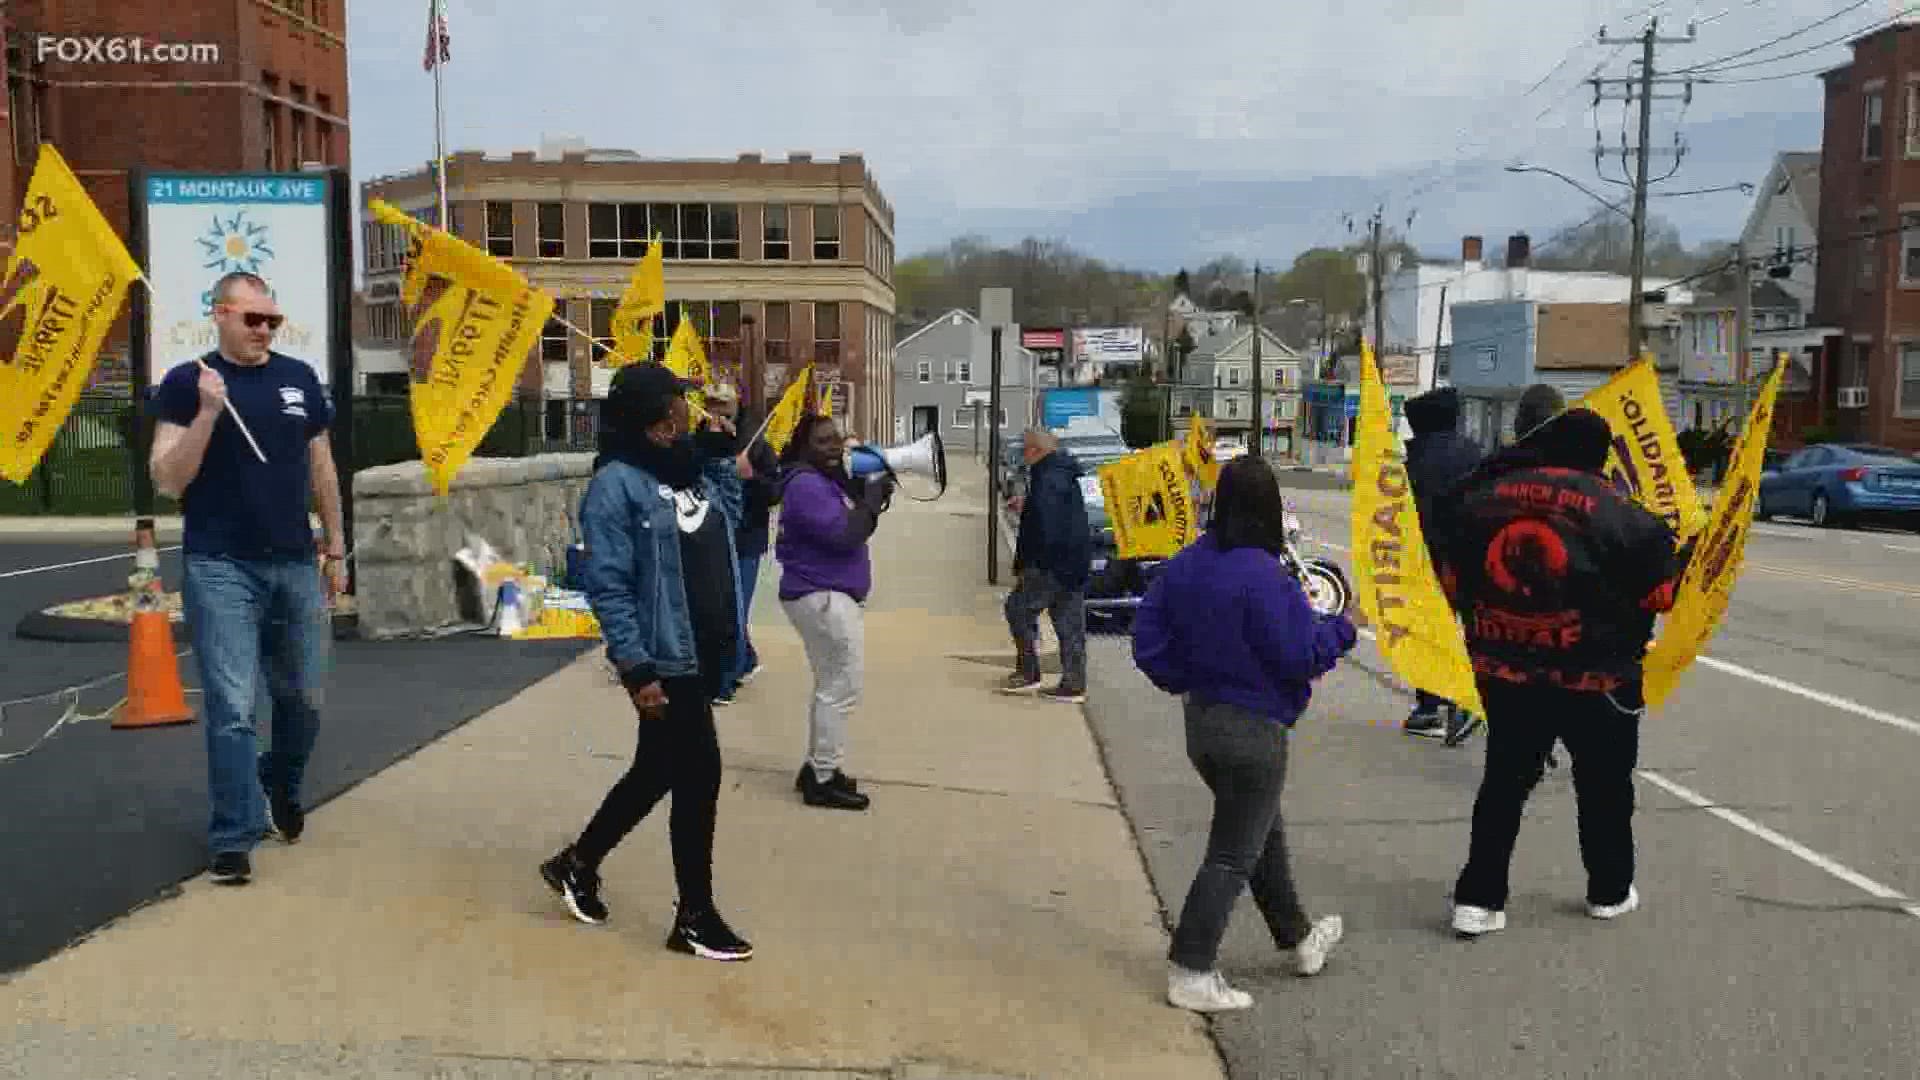 Union workers at the mental health clinic in New London started a three-day strike Sunday over pay and staffing levels